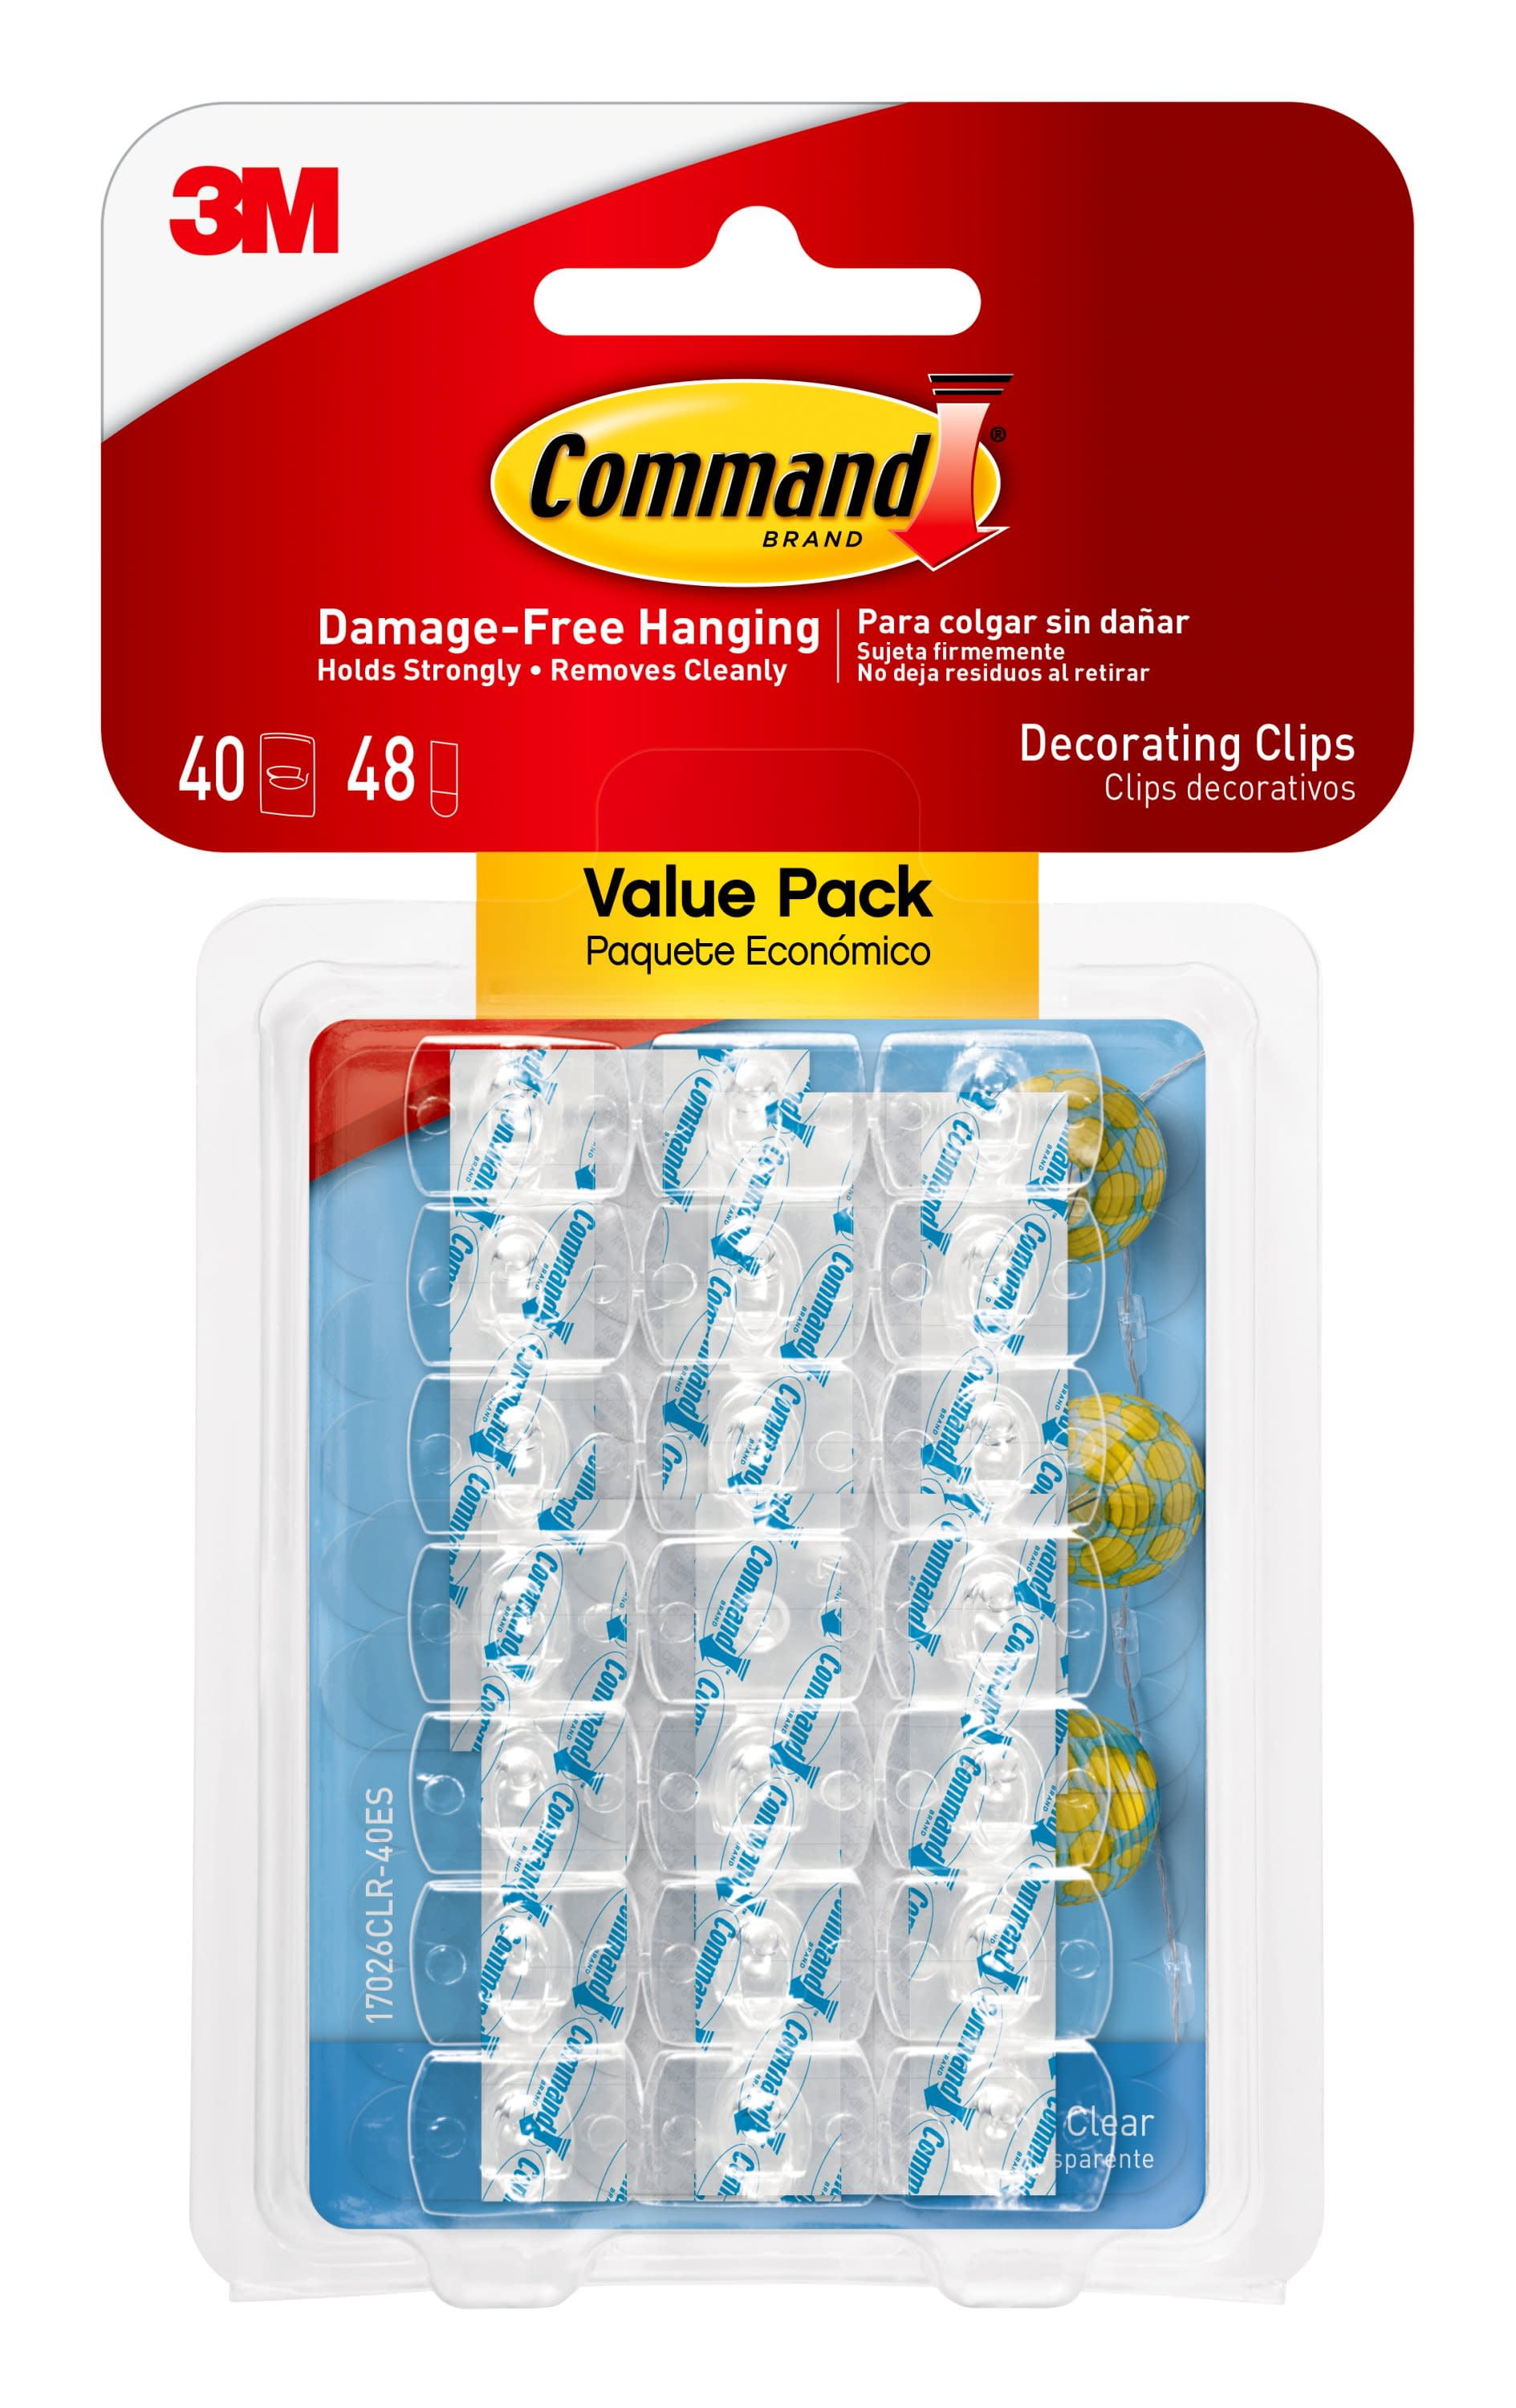 3M Command Self-Adhesive Damage Free Hanging Clear Decorating Clips for Fairy Lights